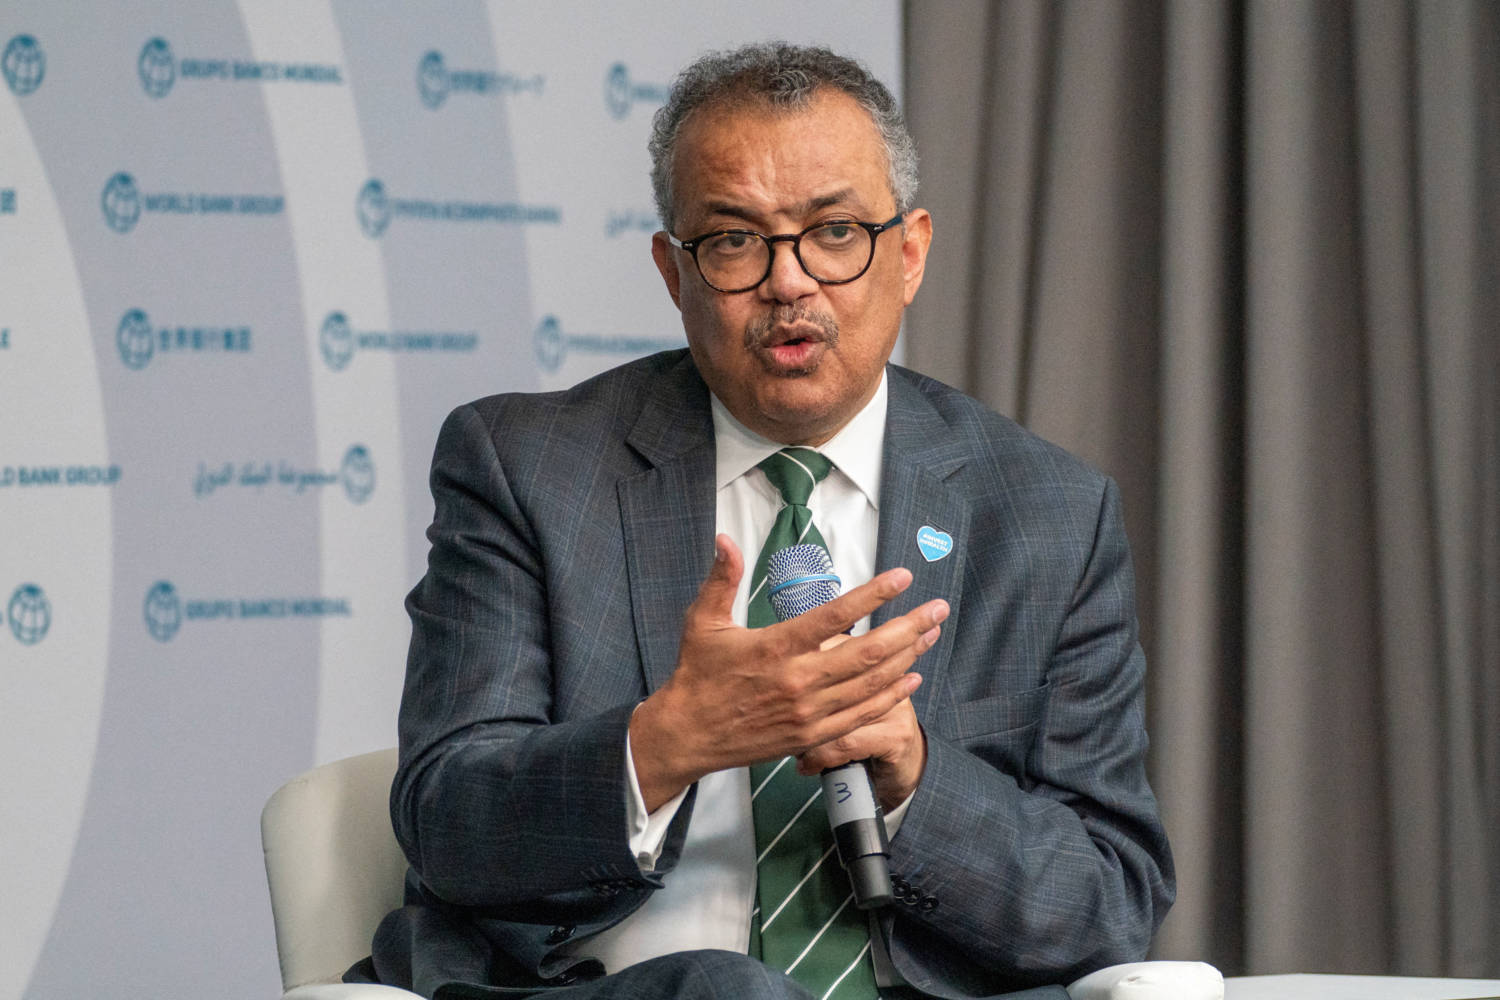 Who Director General Tedros Adhanom Ghebreyesus Speaks During An Event During The Imf Spring Meetings In Washington